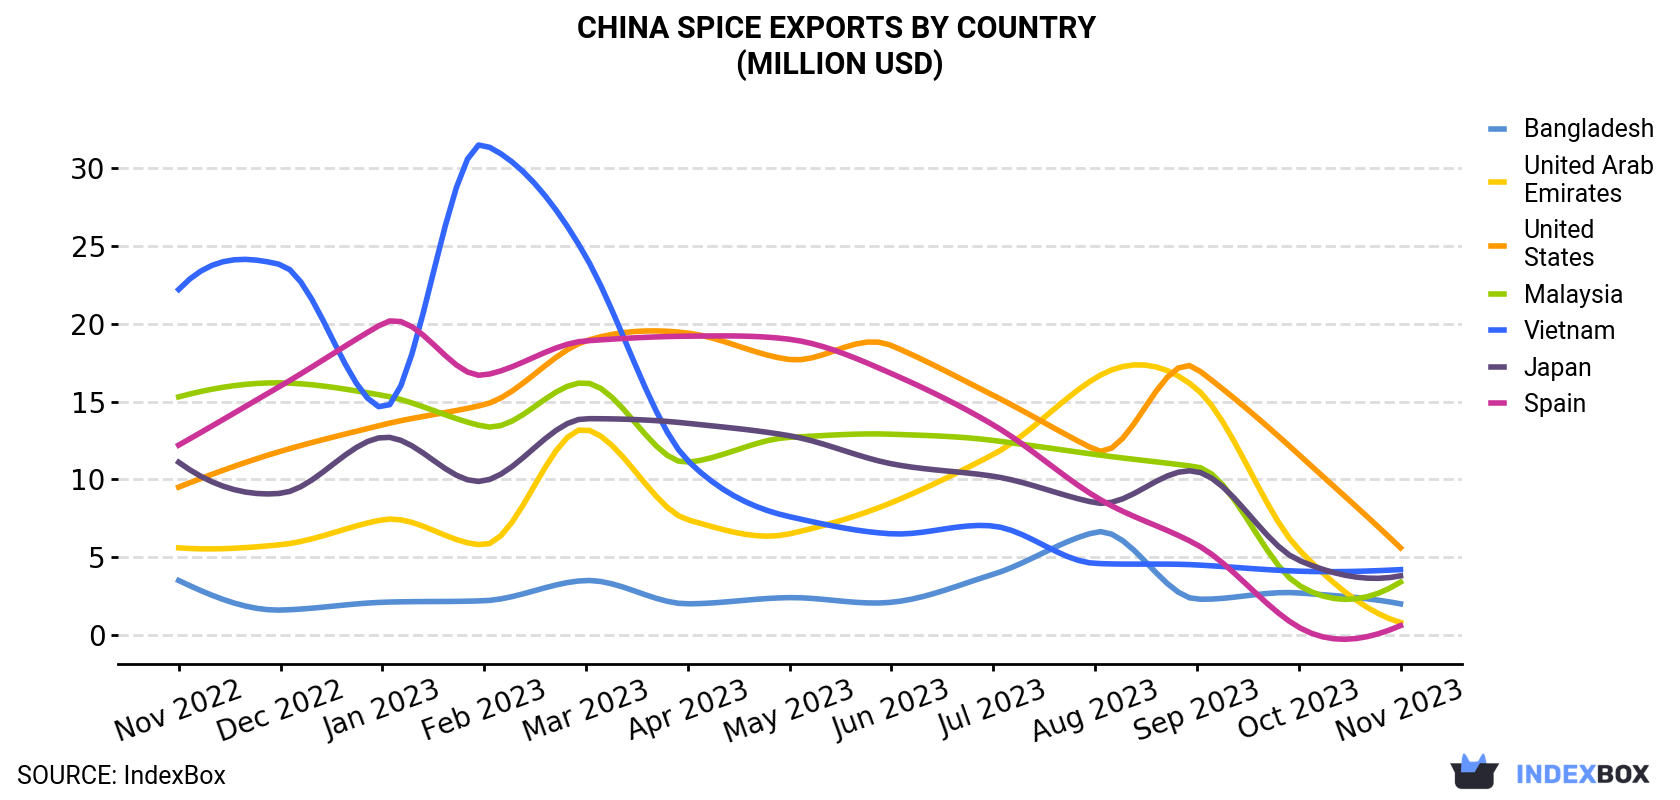 China Spice Exports By Country (Million USD)